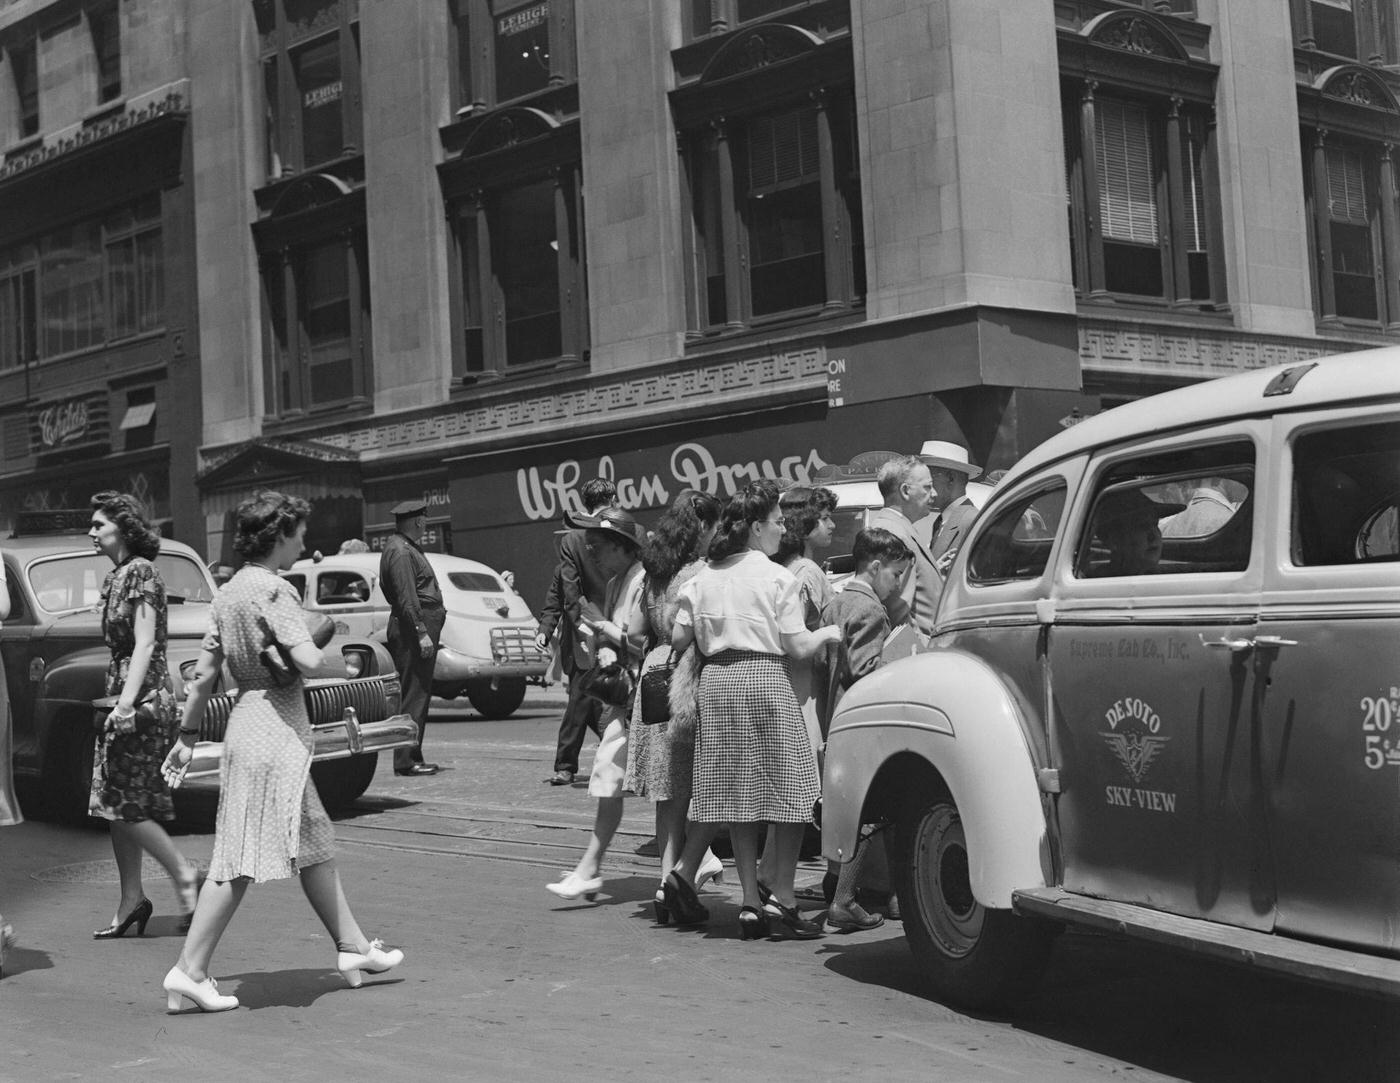 Whelan Drugs Store And A Desoto Sky-View Taxicab On 42Nd Street In Manhattan, 1940.